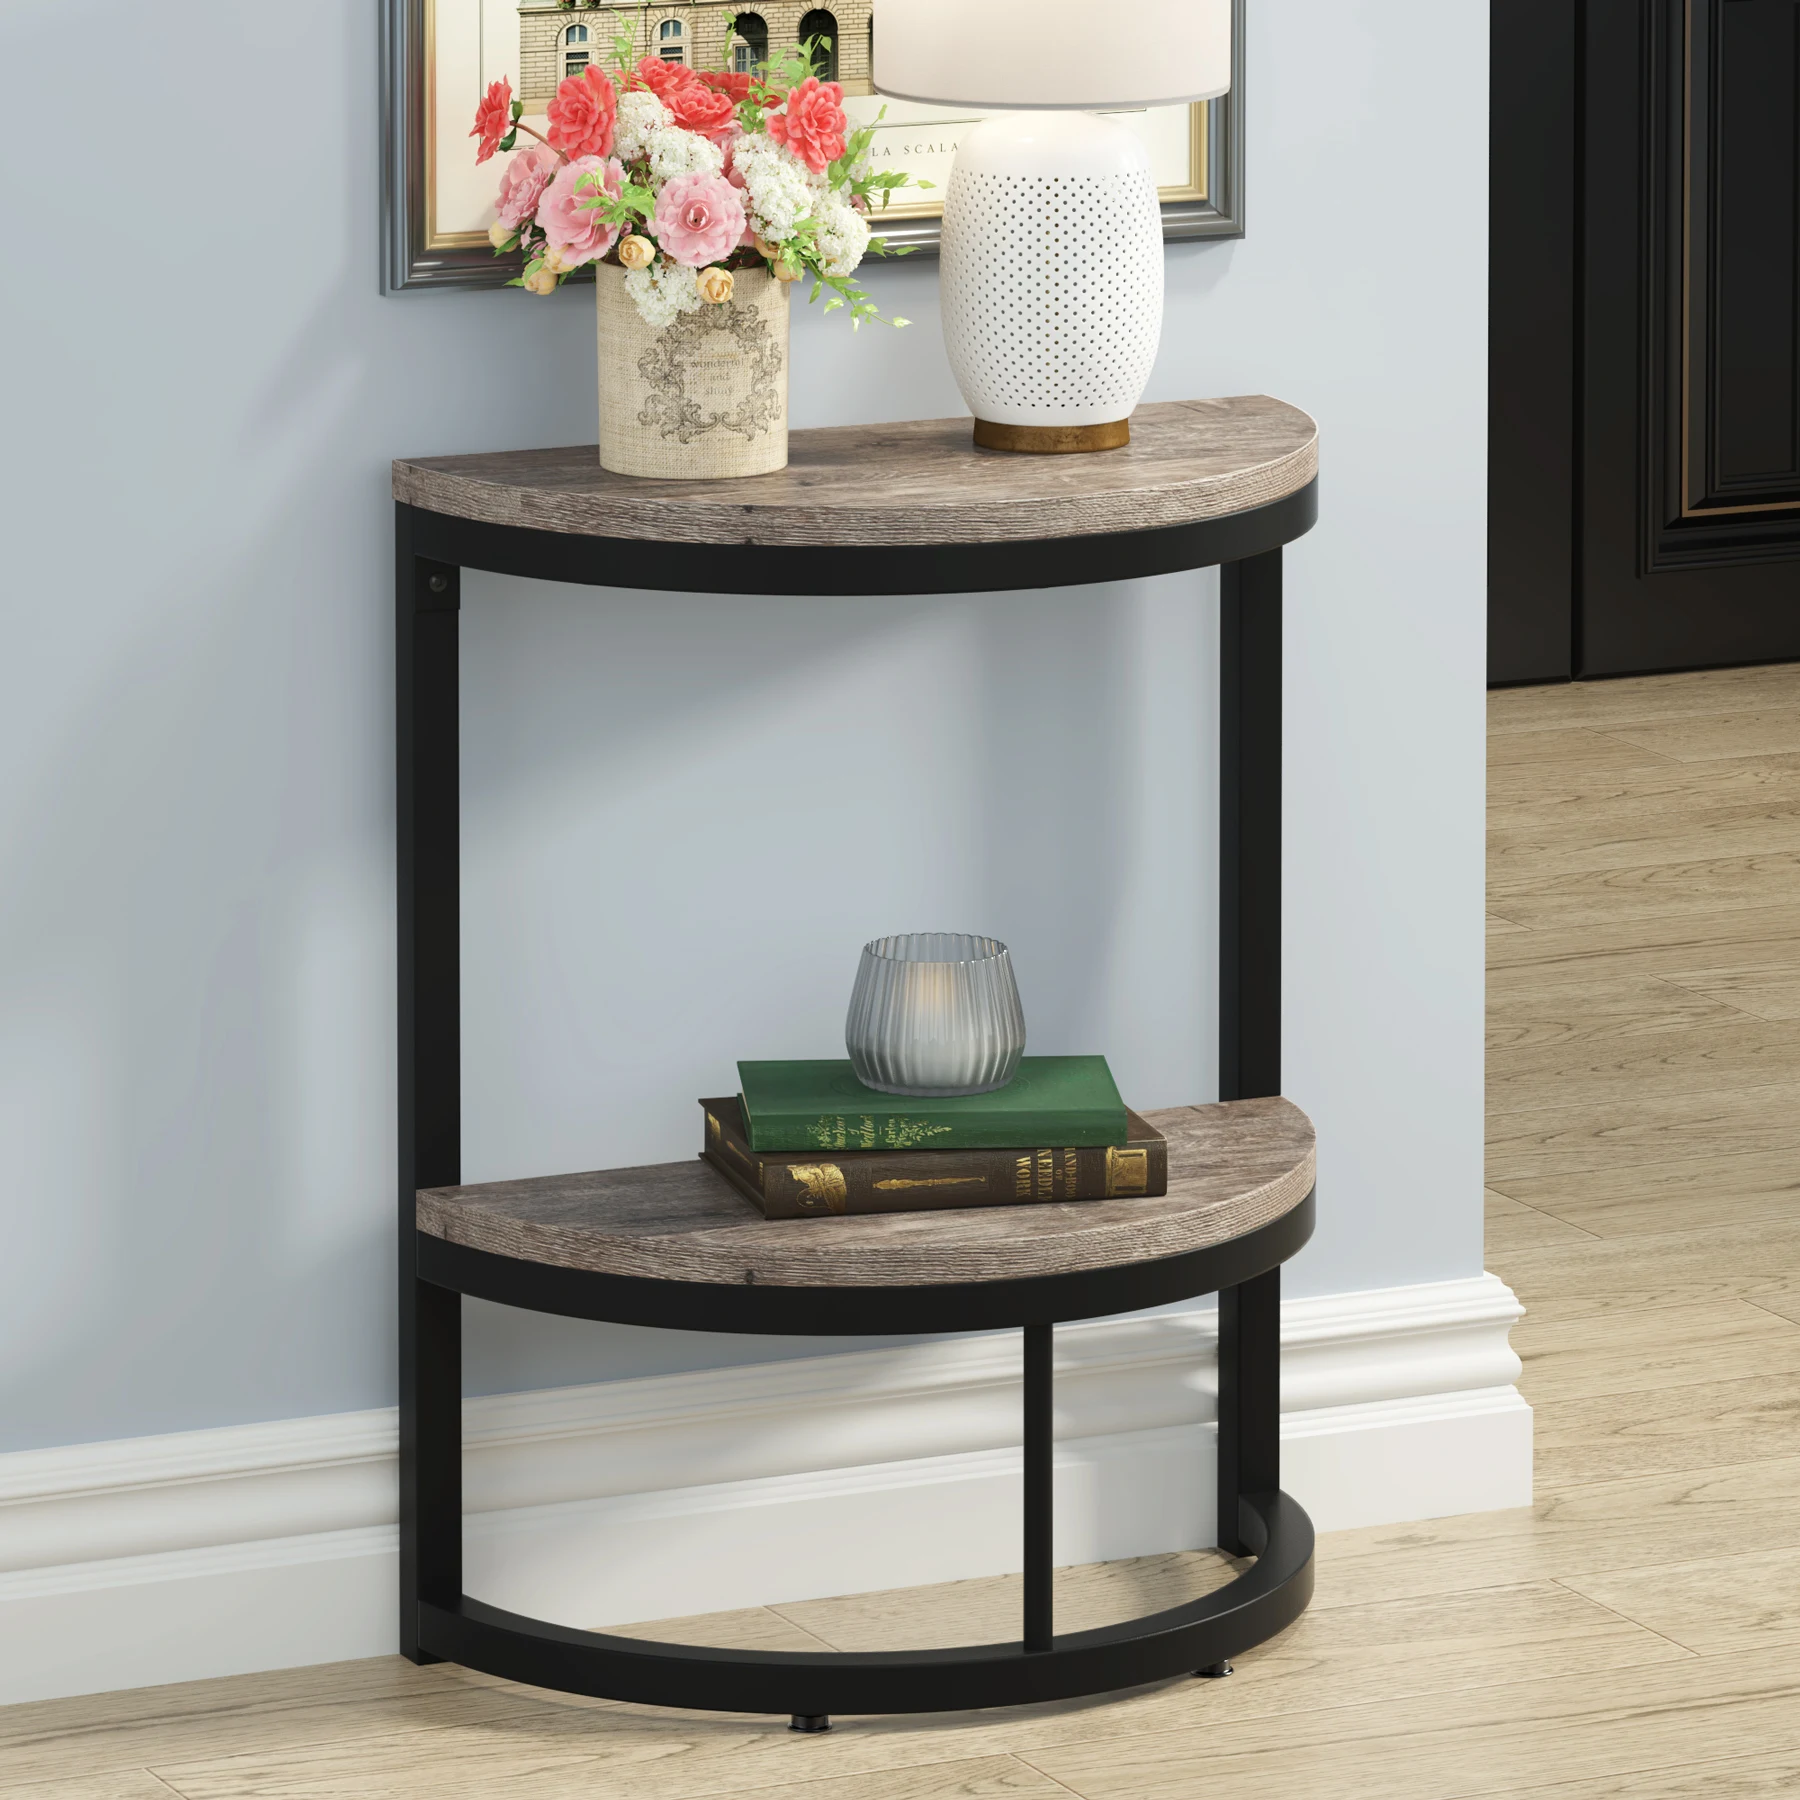 

Tribesigns 2-Tier End Table Semi Circle, Small Half Round Side Table with Storage Shelf, Wood Accent Table Slim C Table